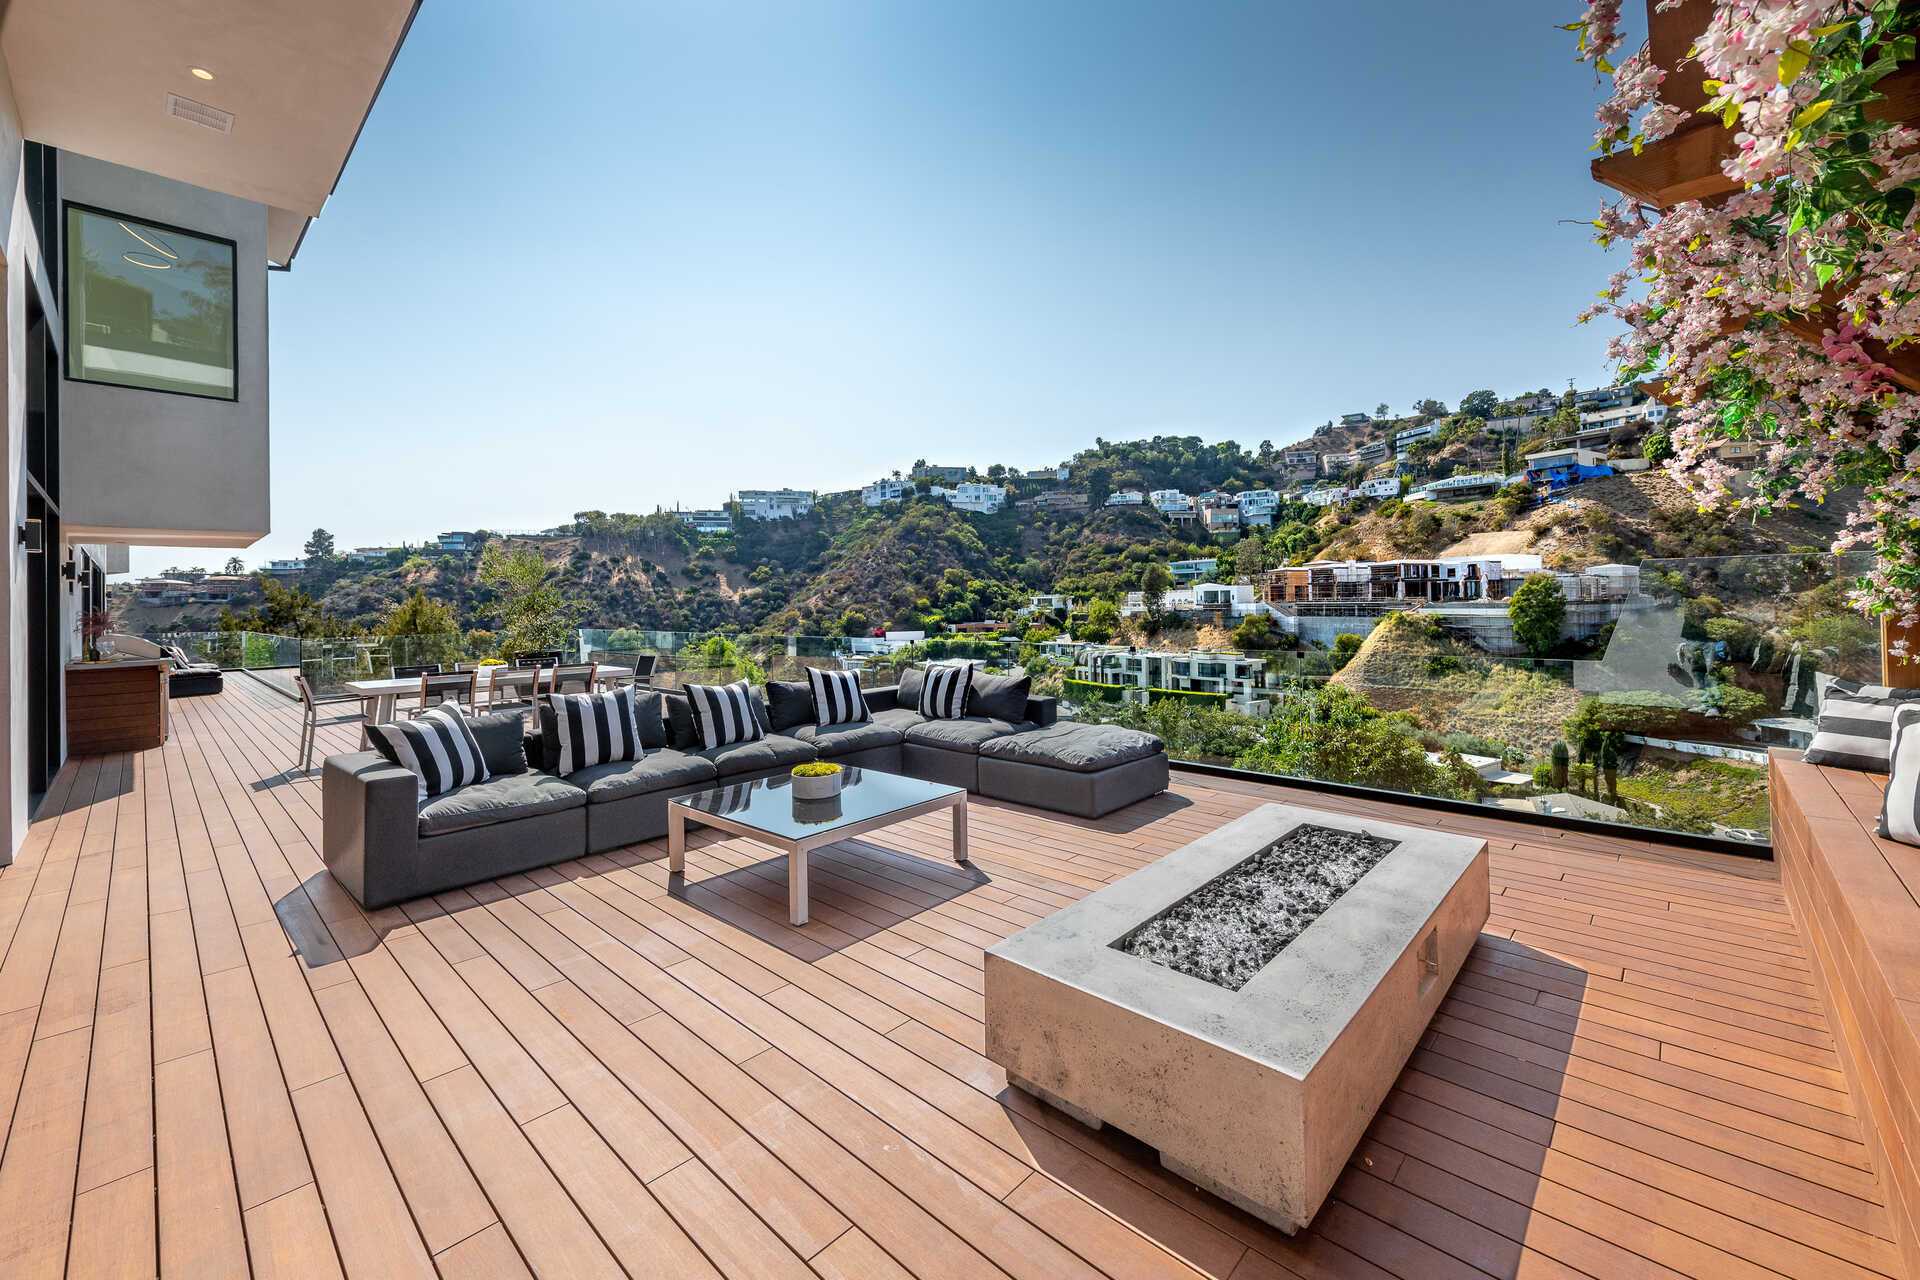 This-6350000-Newly-Constructed-Los-Angeles-Home-is-the-Ultimate-Hollywood-Hills-Haven-16